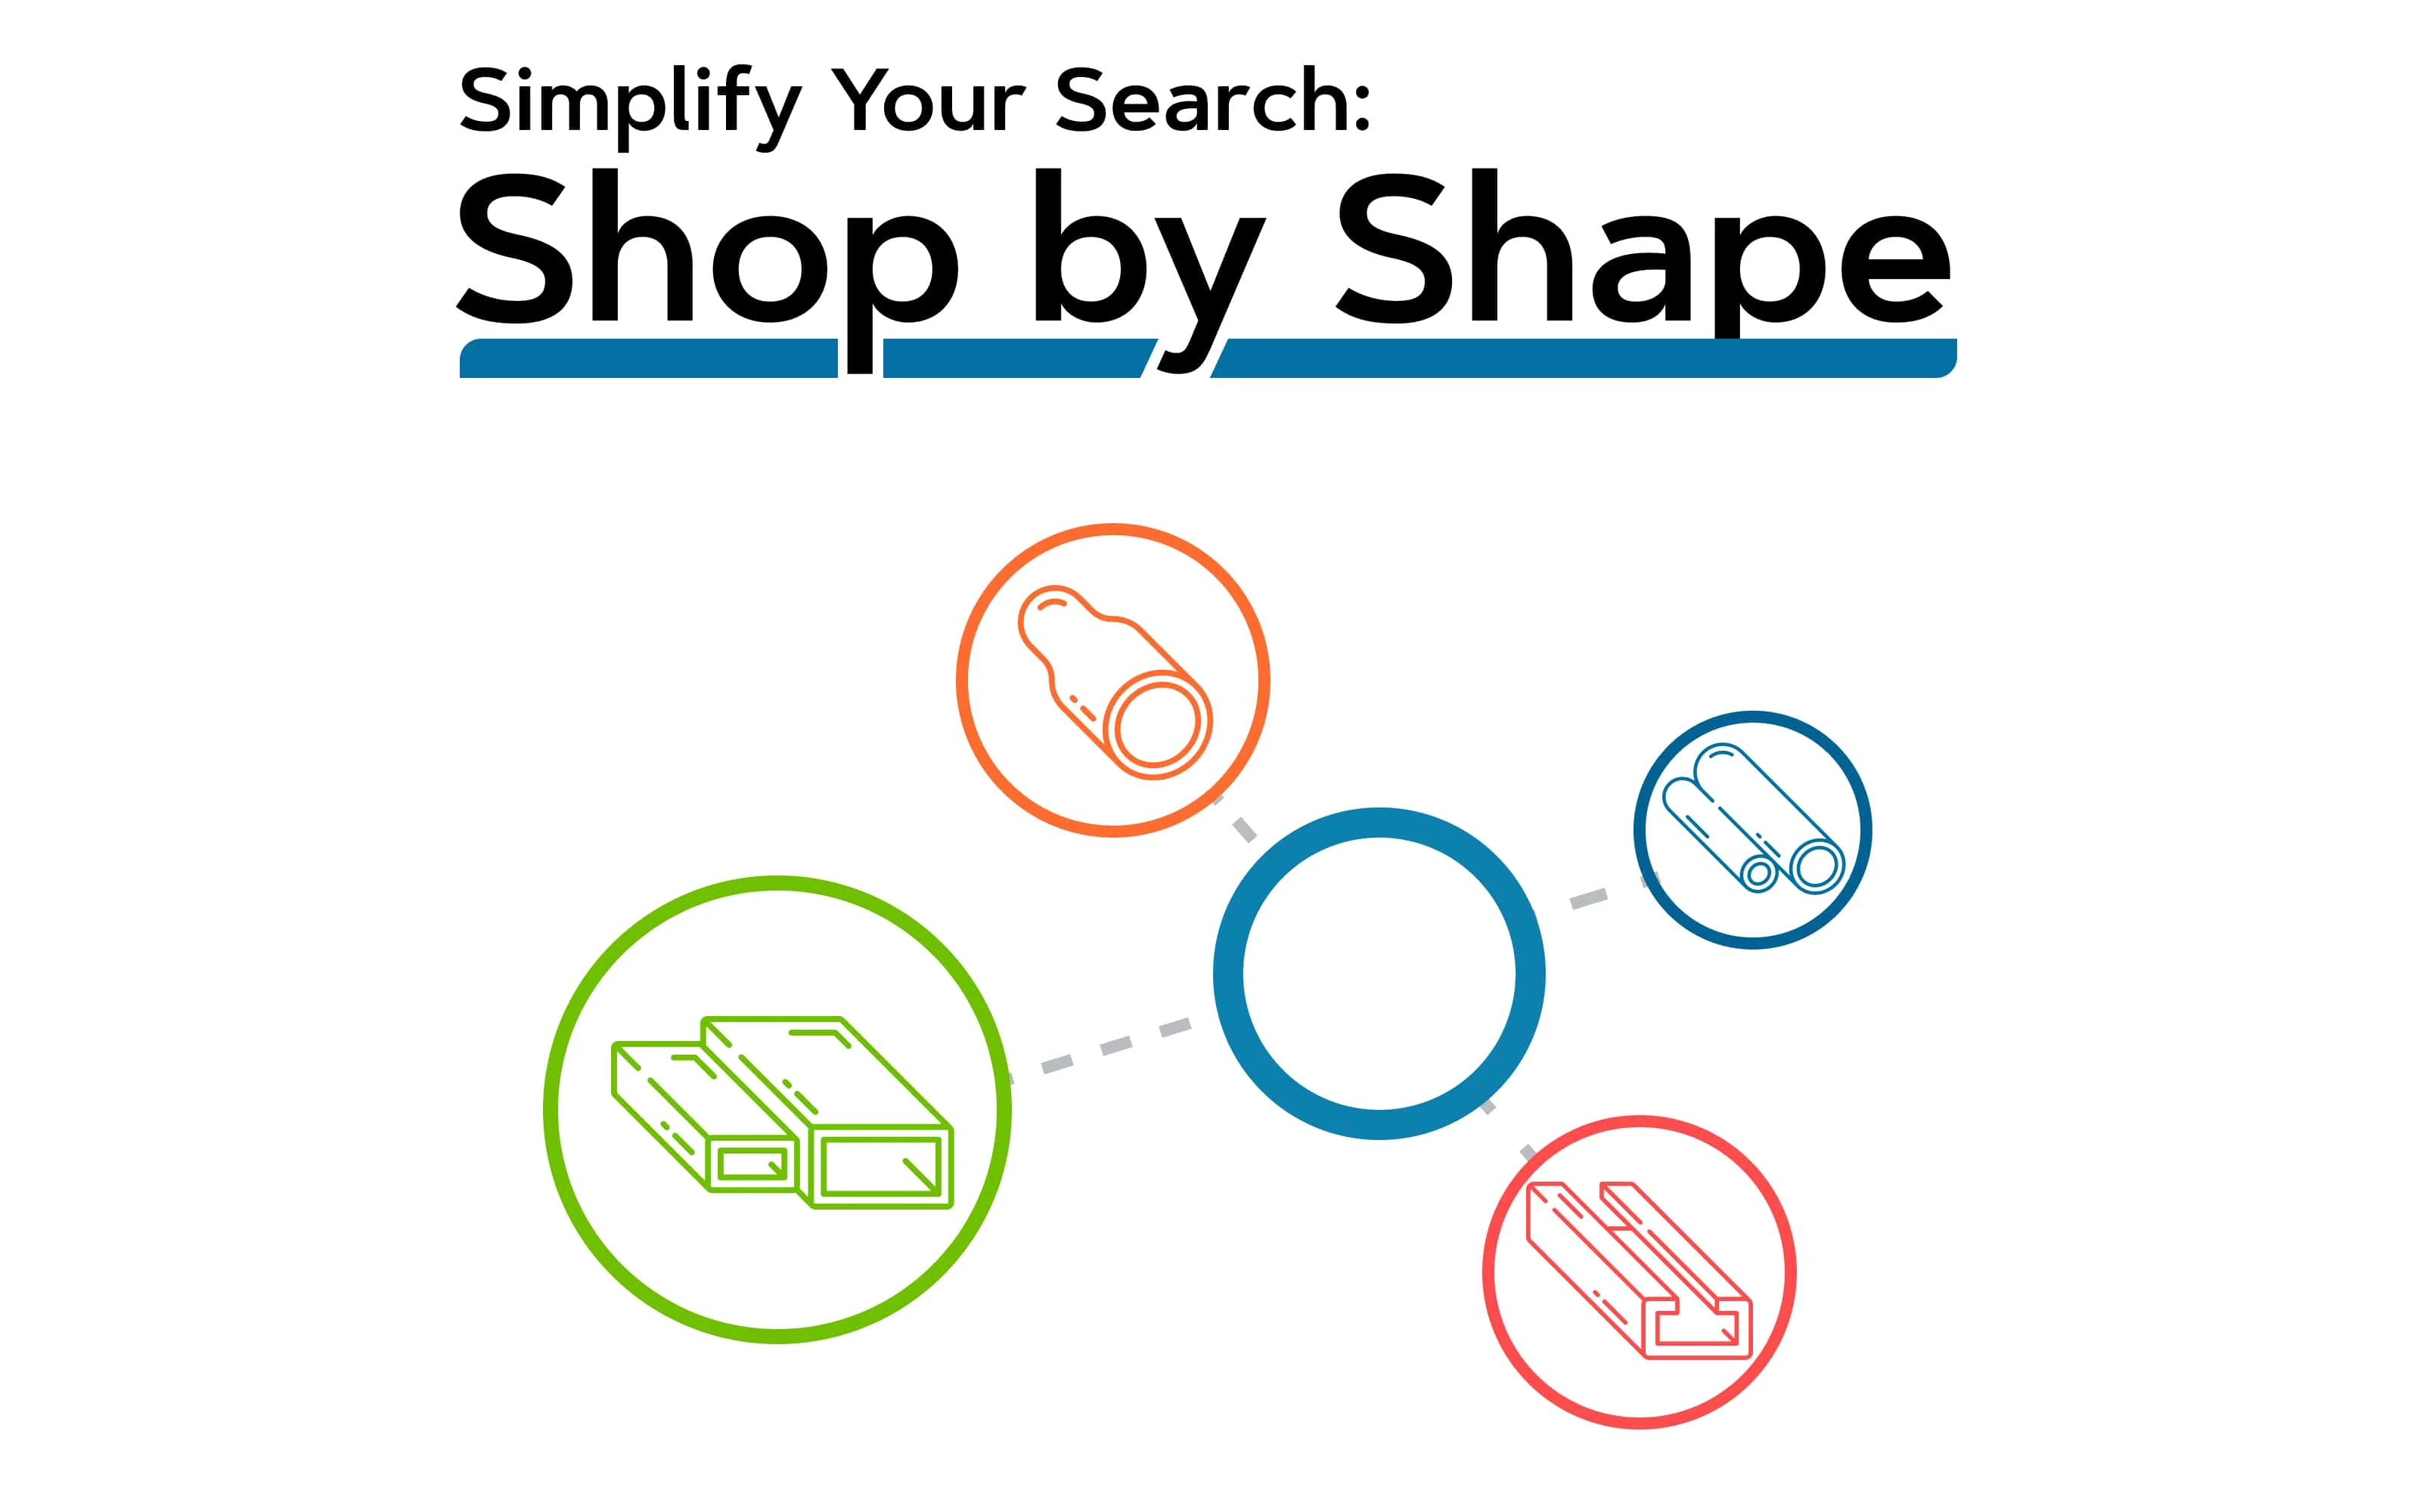 Online metals shop by shape hero image for mobile